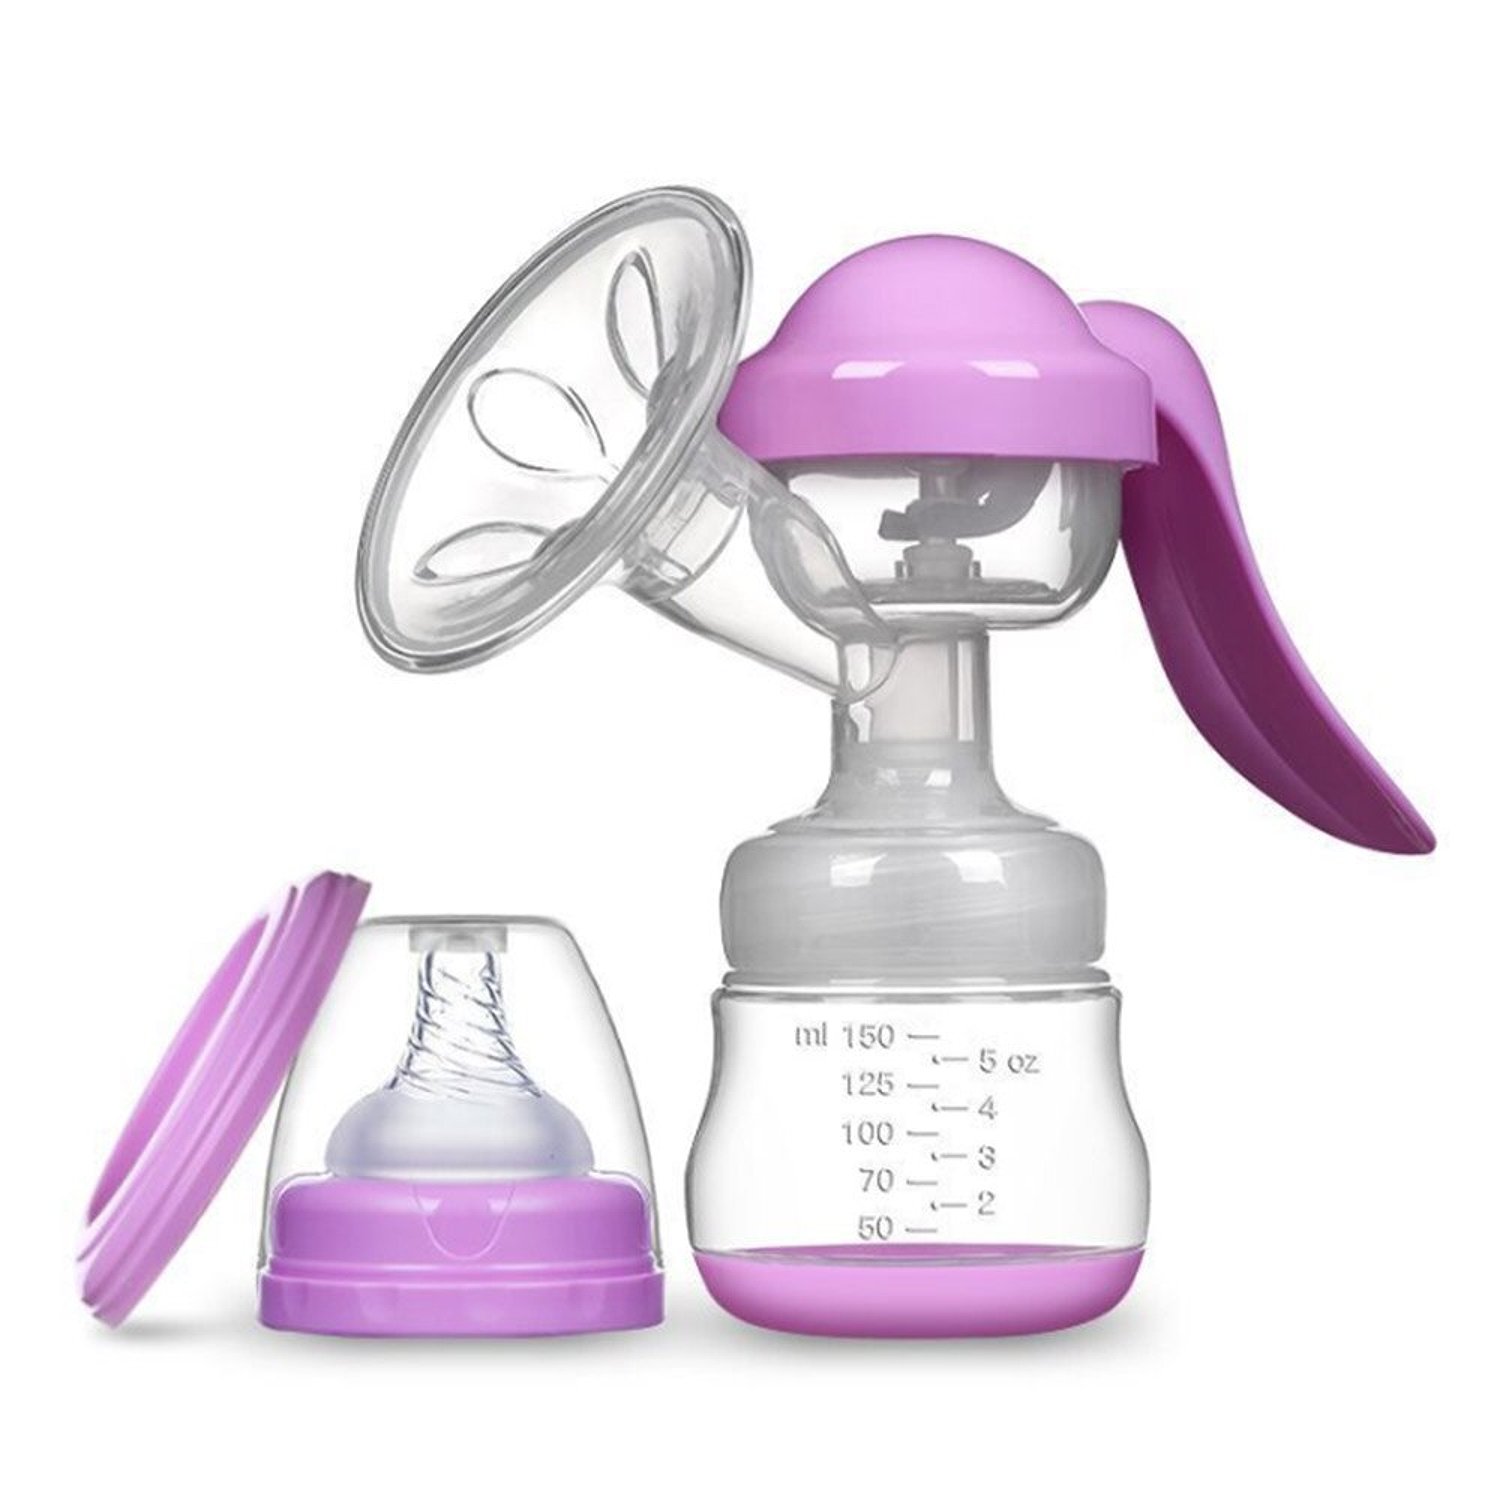 Understanding the Benefits of Silicone Breast Pump Devices for Milk Expression